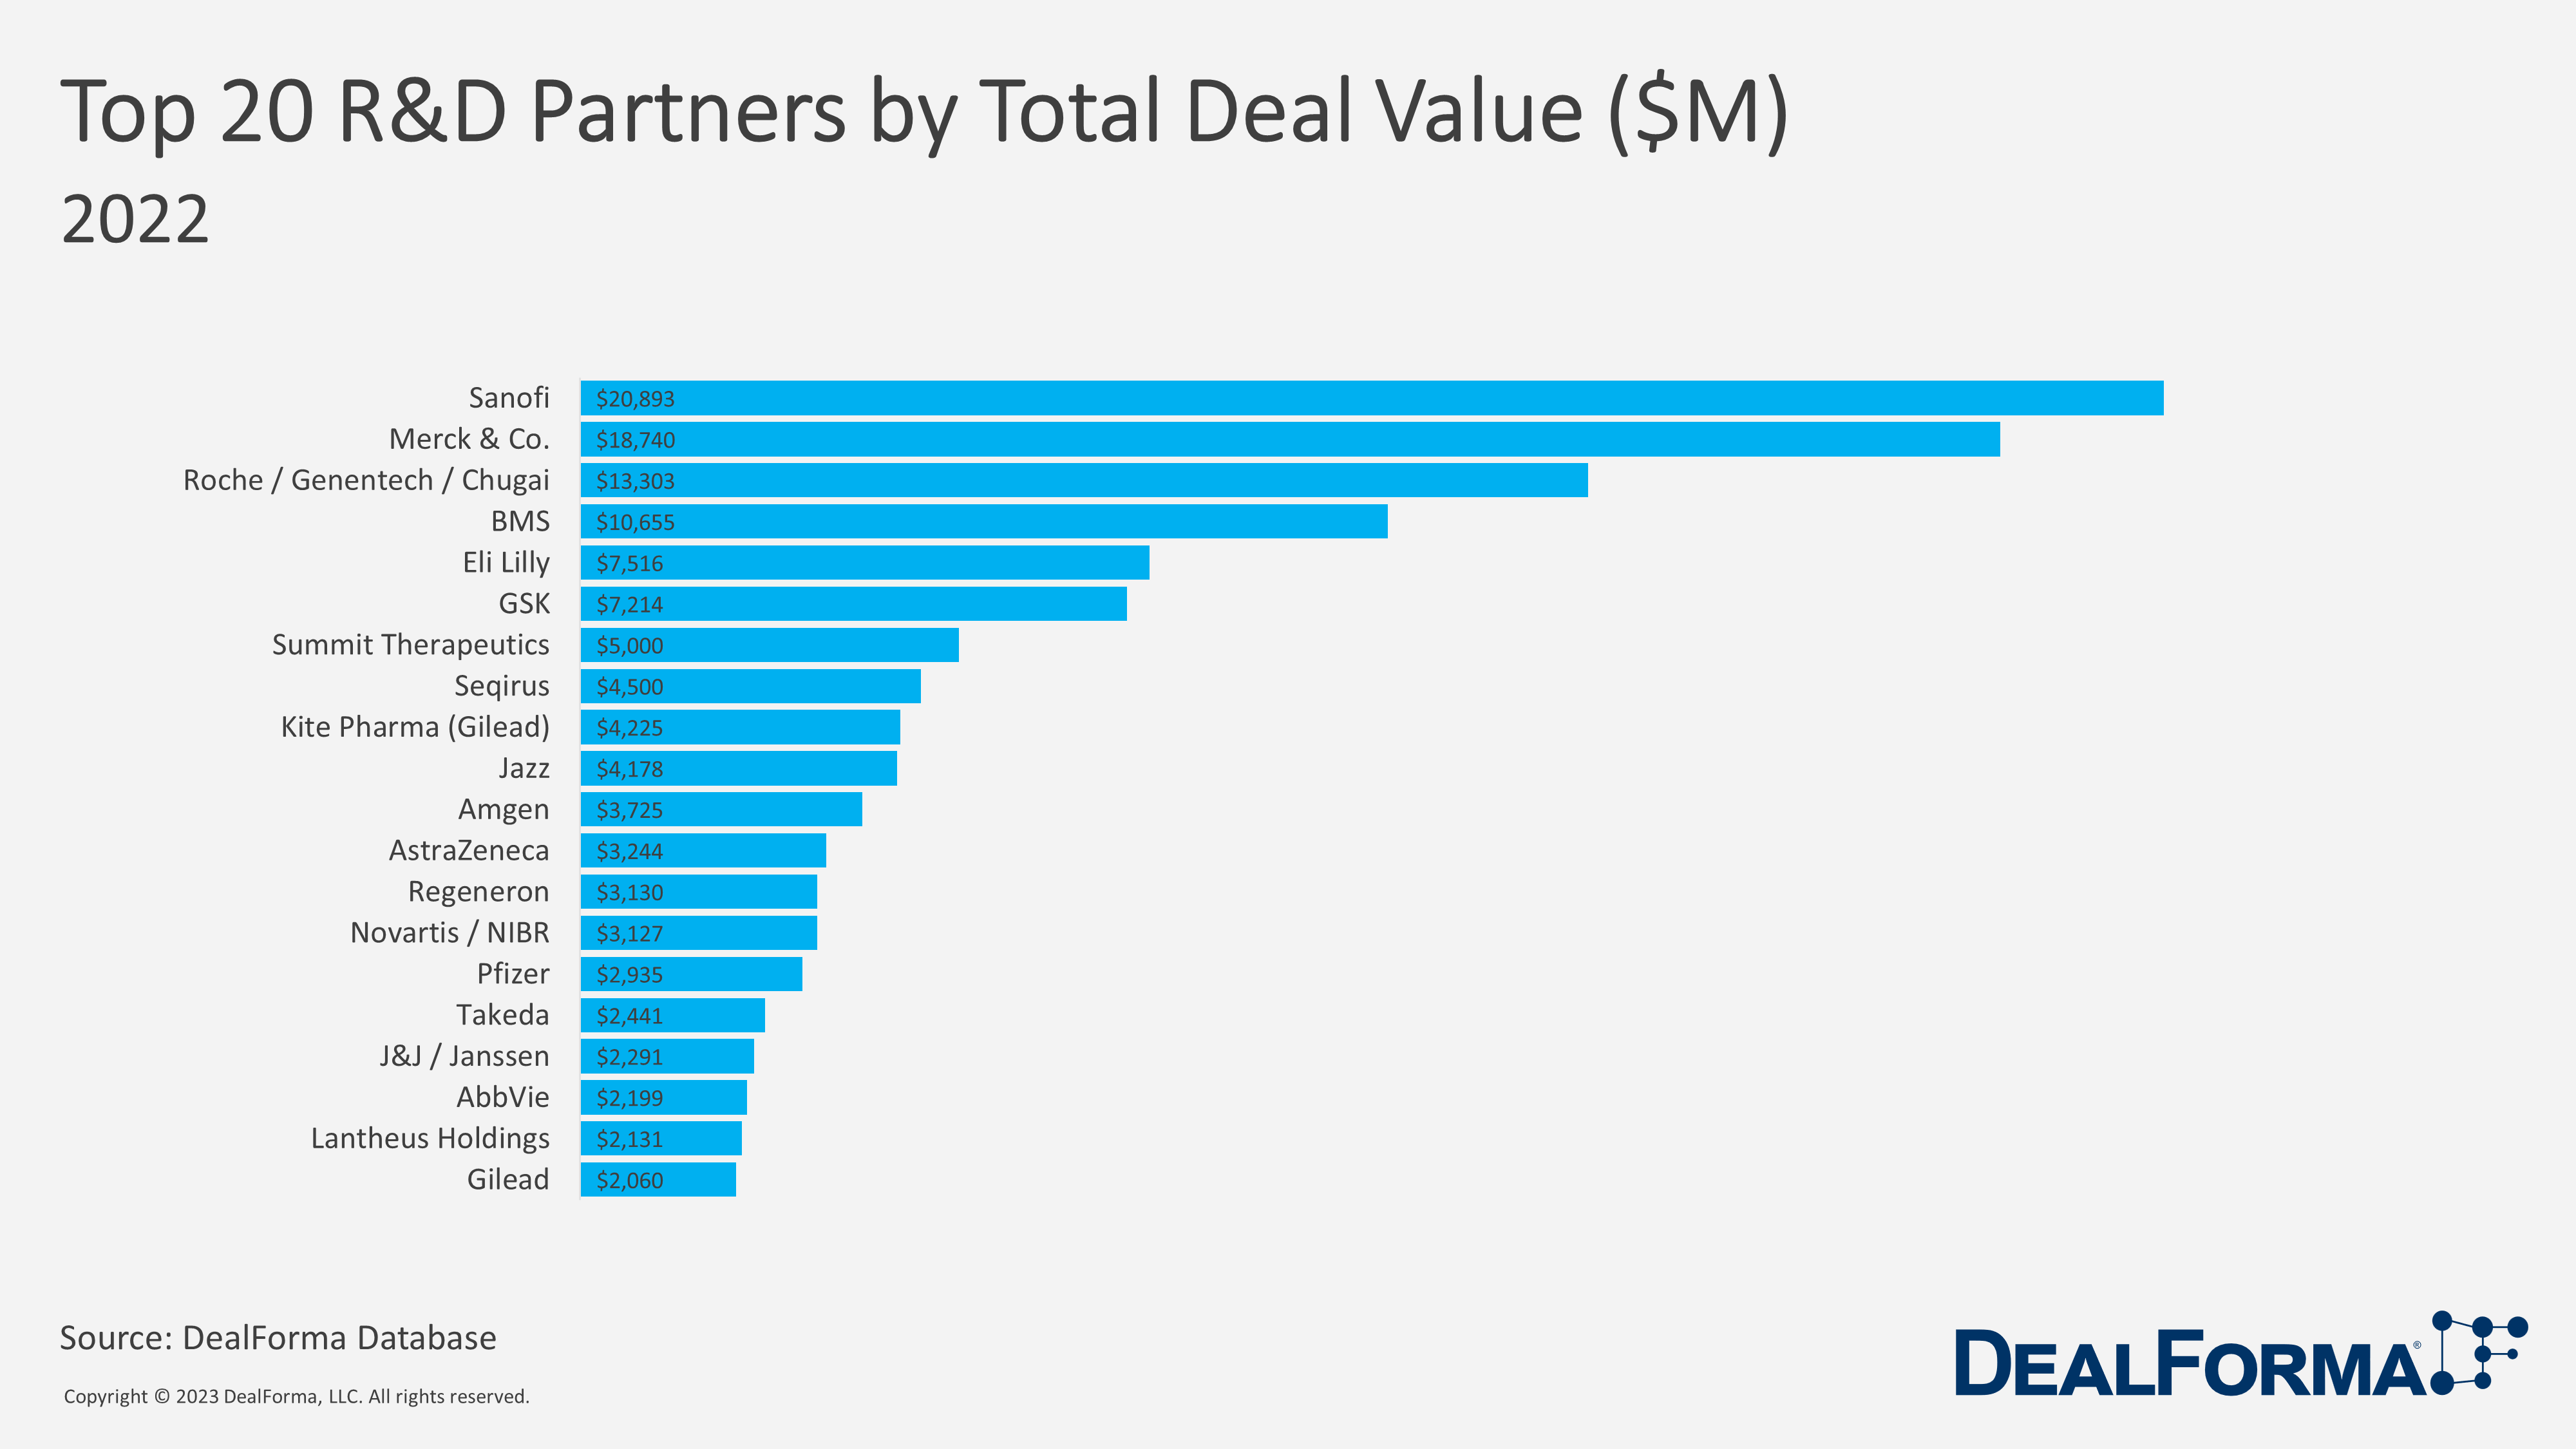 Top 20 R&D Partners by Total Deal Value